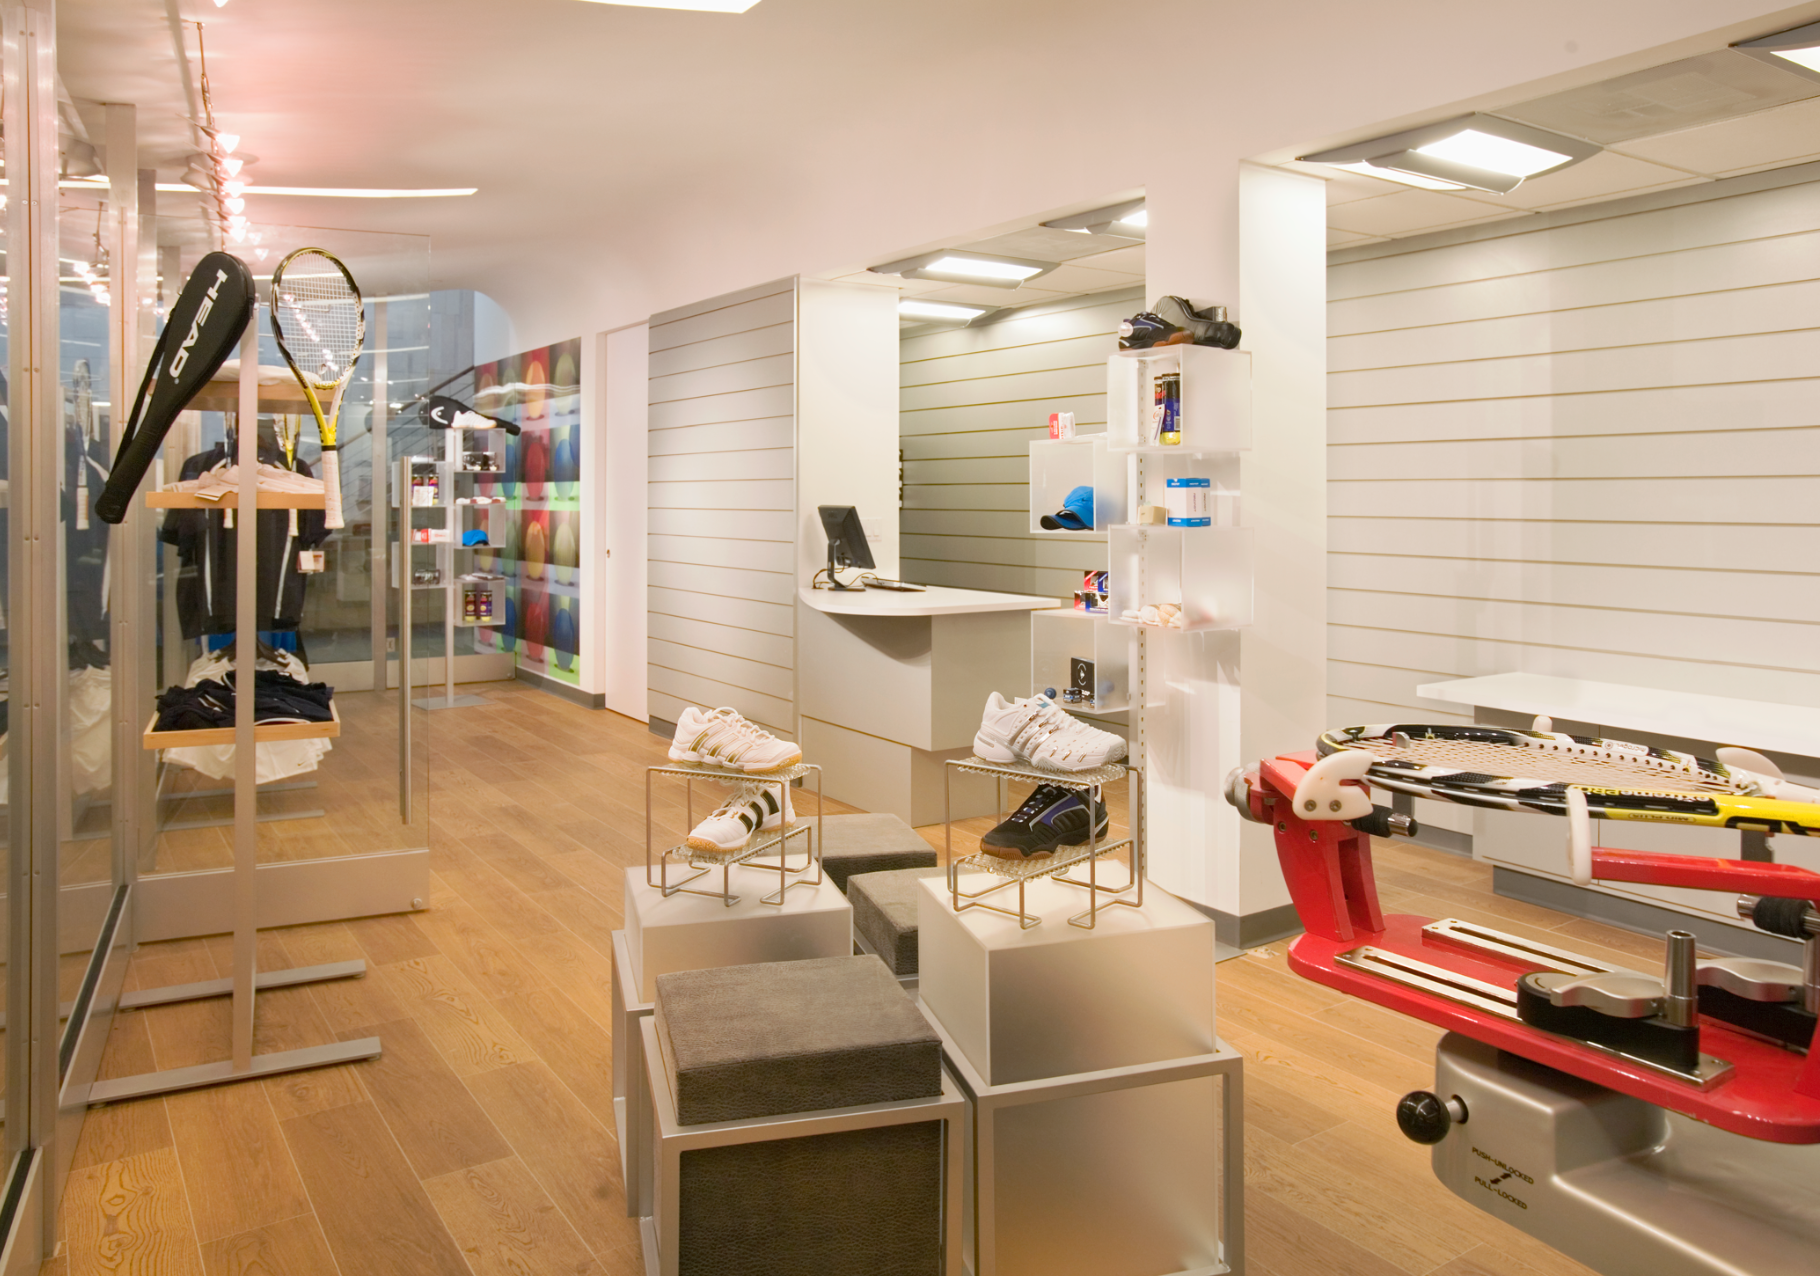  The Pro Shop is not only spacious but could be found on Rodeo Drive in Beverly Hills (at least it looks like it).